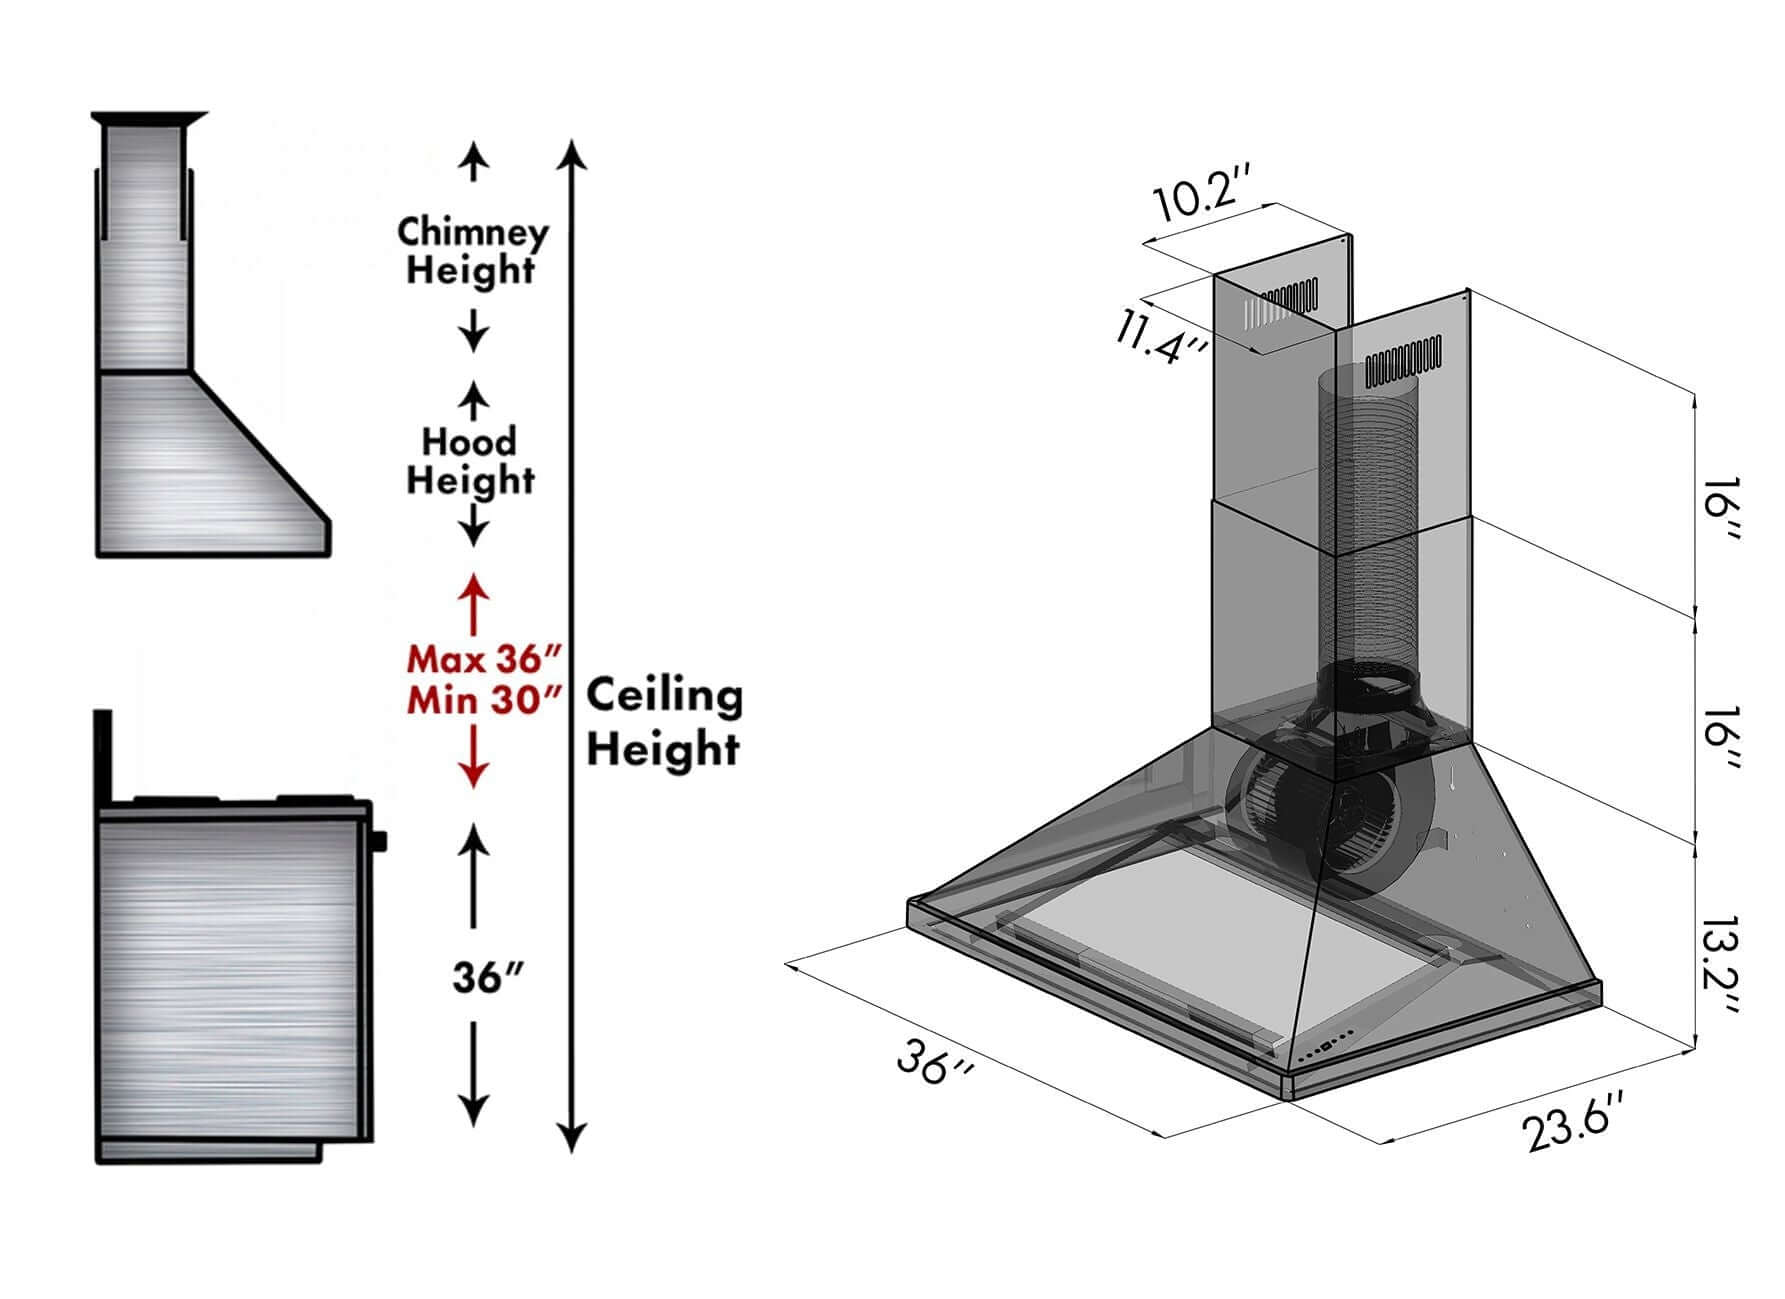 ZLINE 36" Professional Wall Mount Range Hood (696-36) dimensional diagram and chimney height guide.